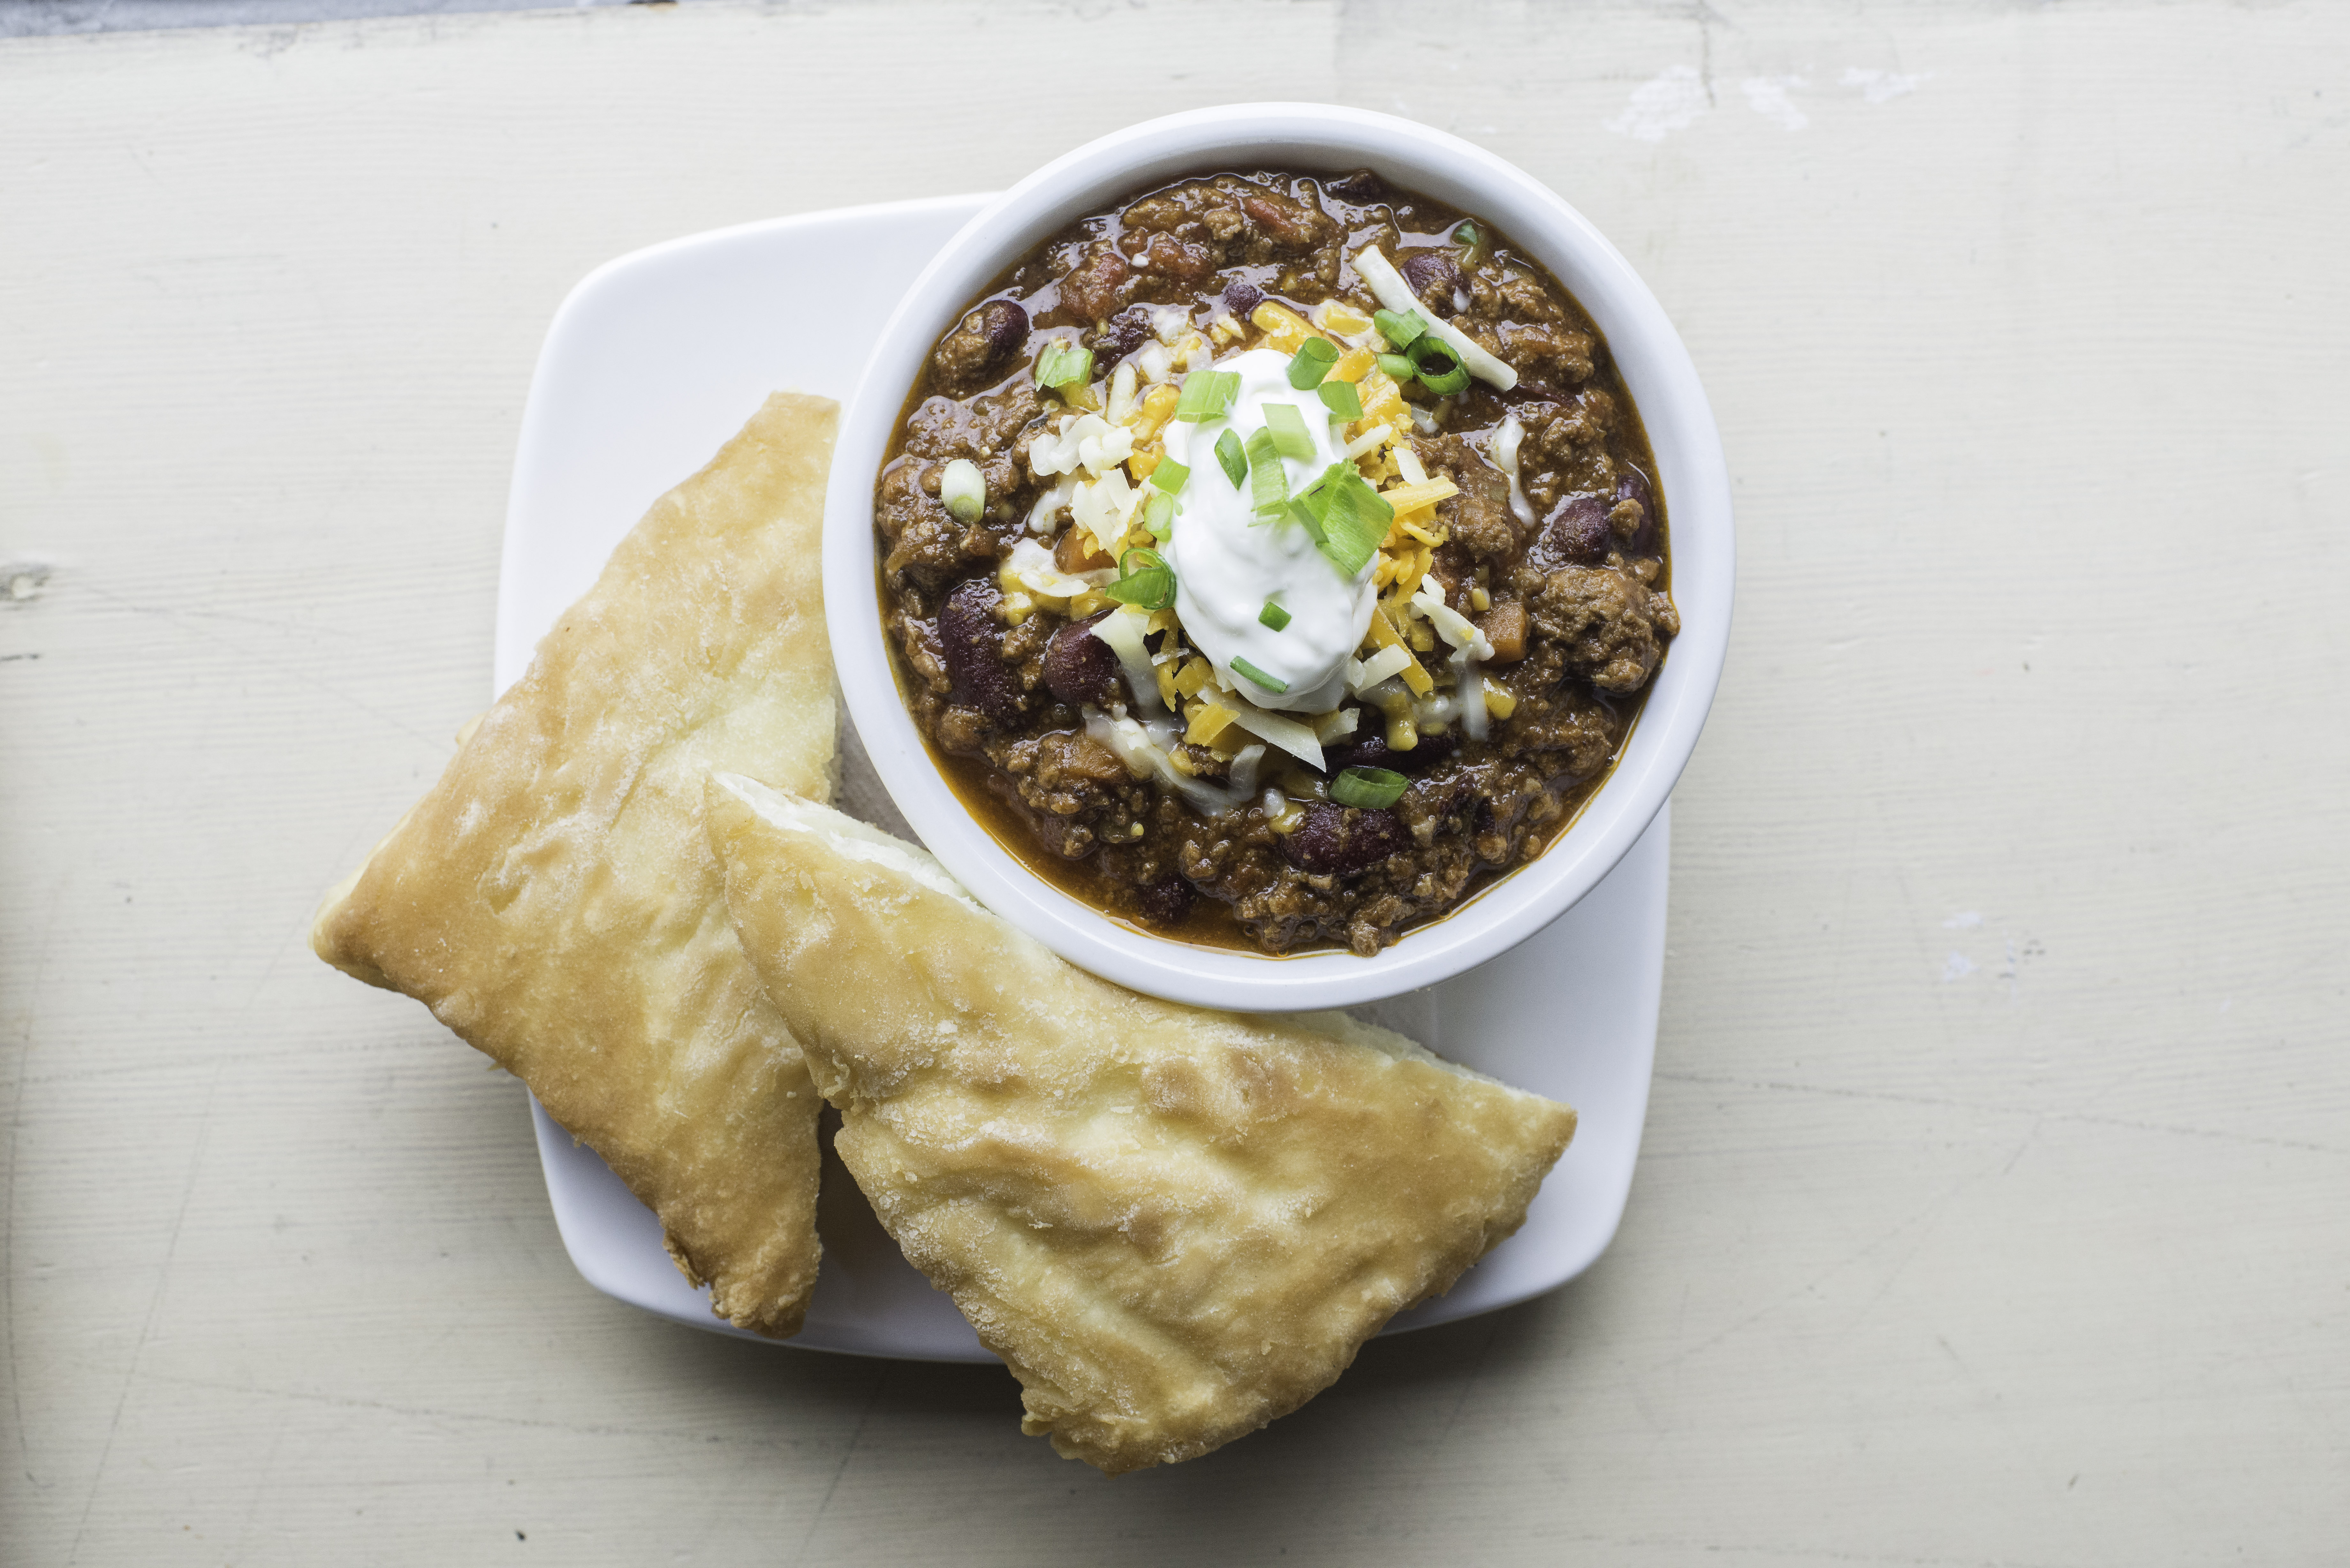 Venison chili and bannock at the Squamish Lil'wat Cultural Centre